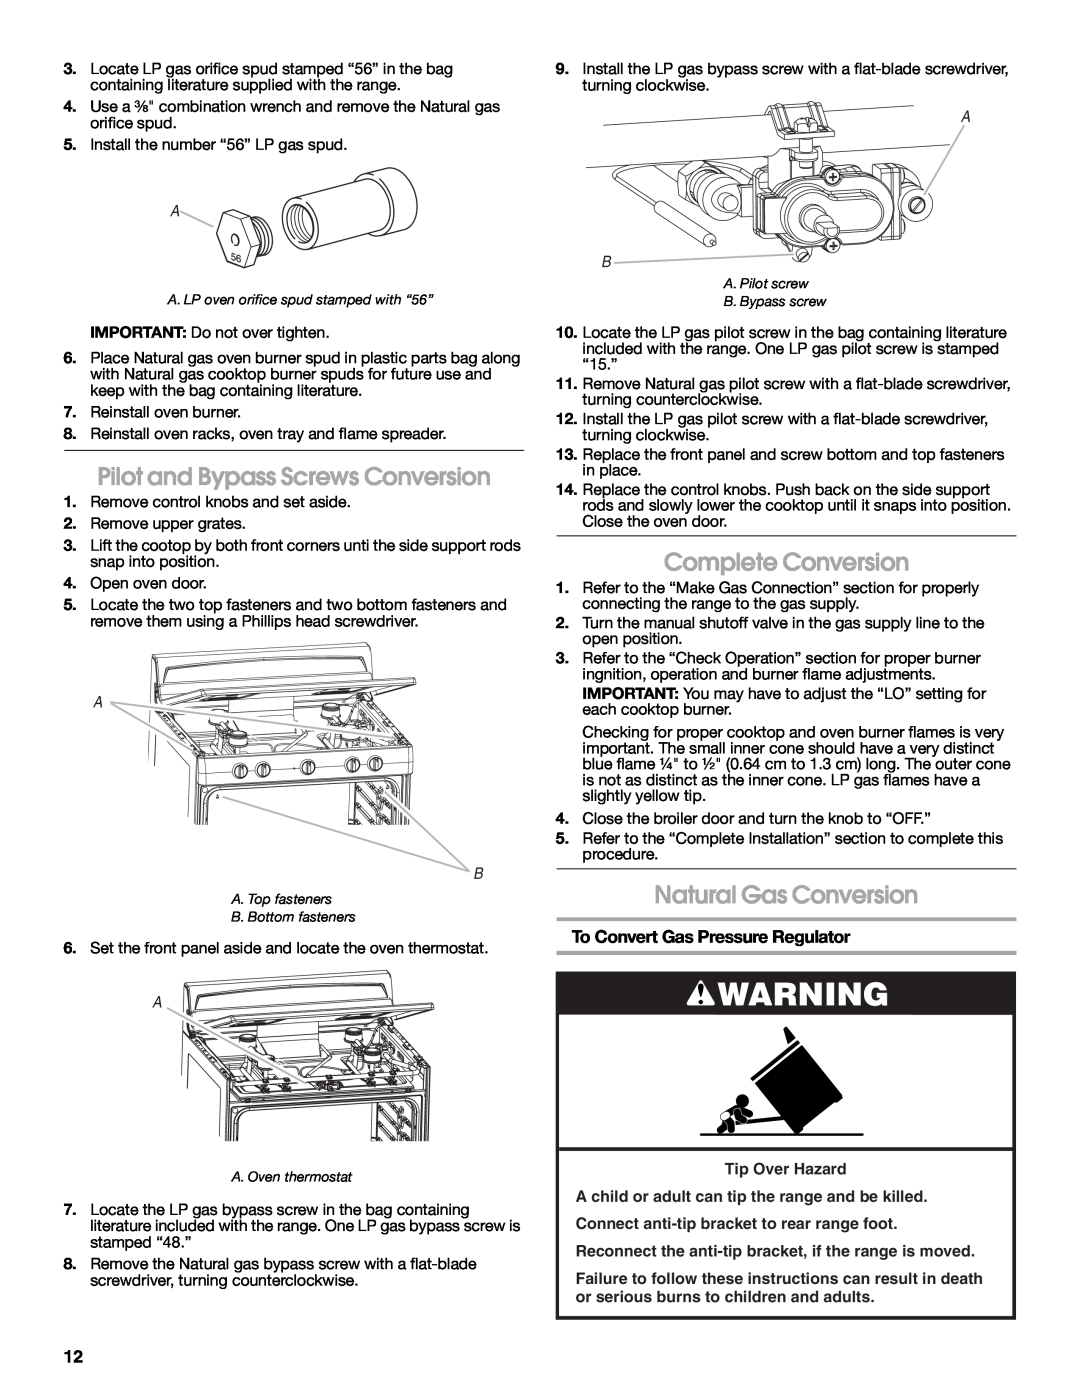 Estate W10121806C installation instructions Pilot and Bypass Screws Conversion, Complete Conversion, Natural Gas Conversion 